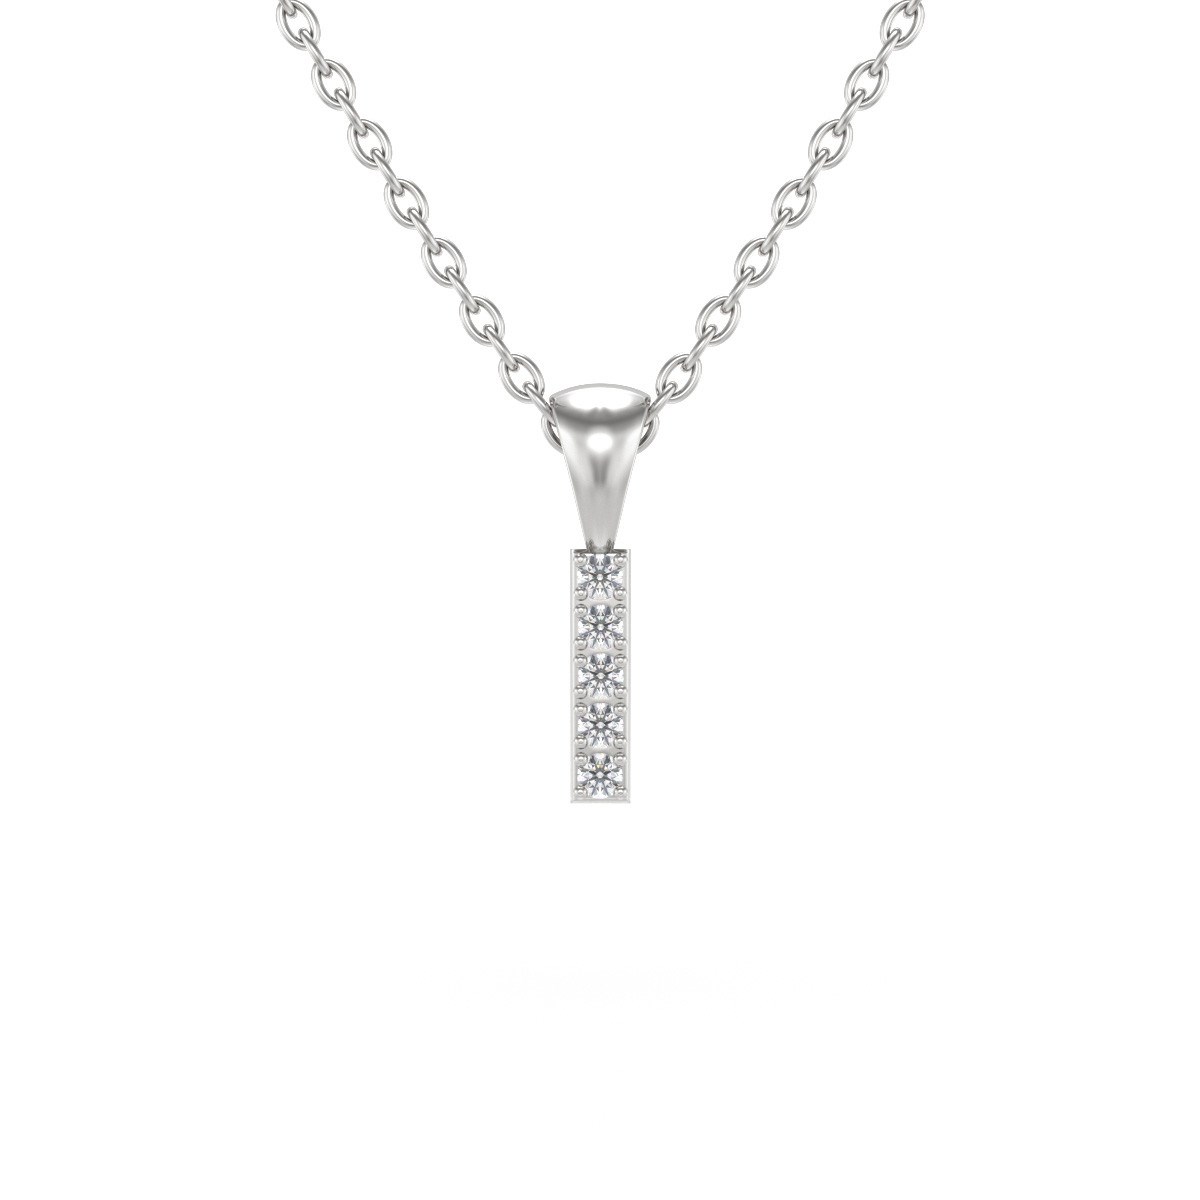 Collier Pendentif ADEN Lettre I Or 750 Blanc Diamant Chaine Or 750 incluse 0.72grs